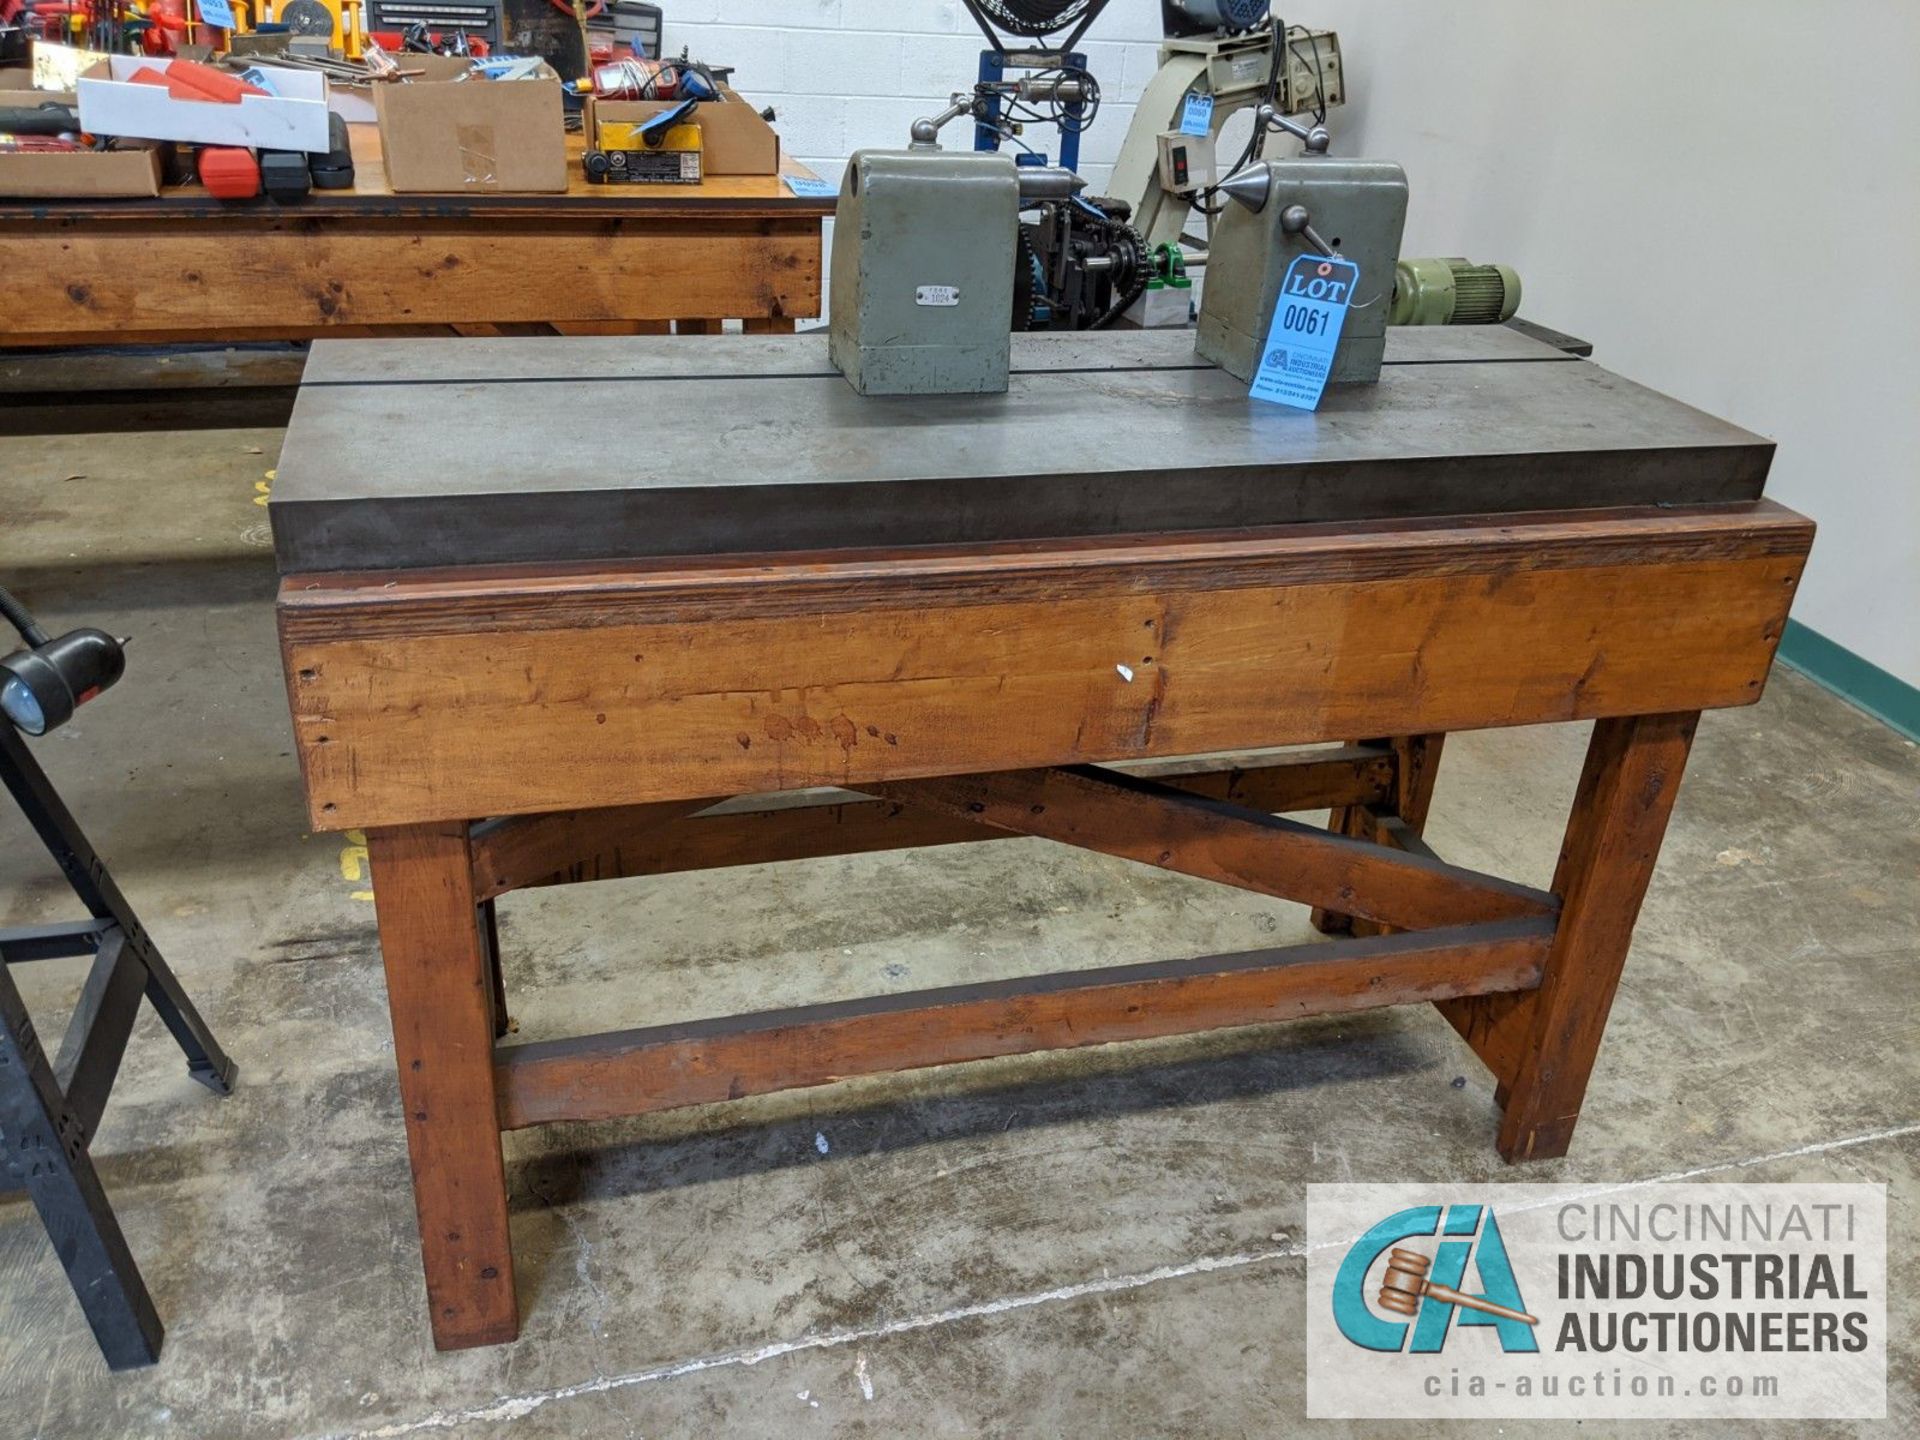 FERE BENCH CENTER ON 20-1/2" X 59" T-SLOTTED TABLE WITH STAND